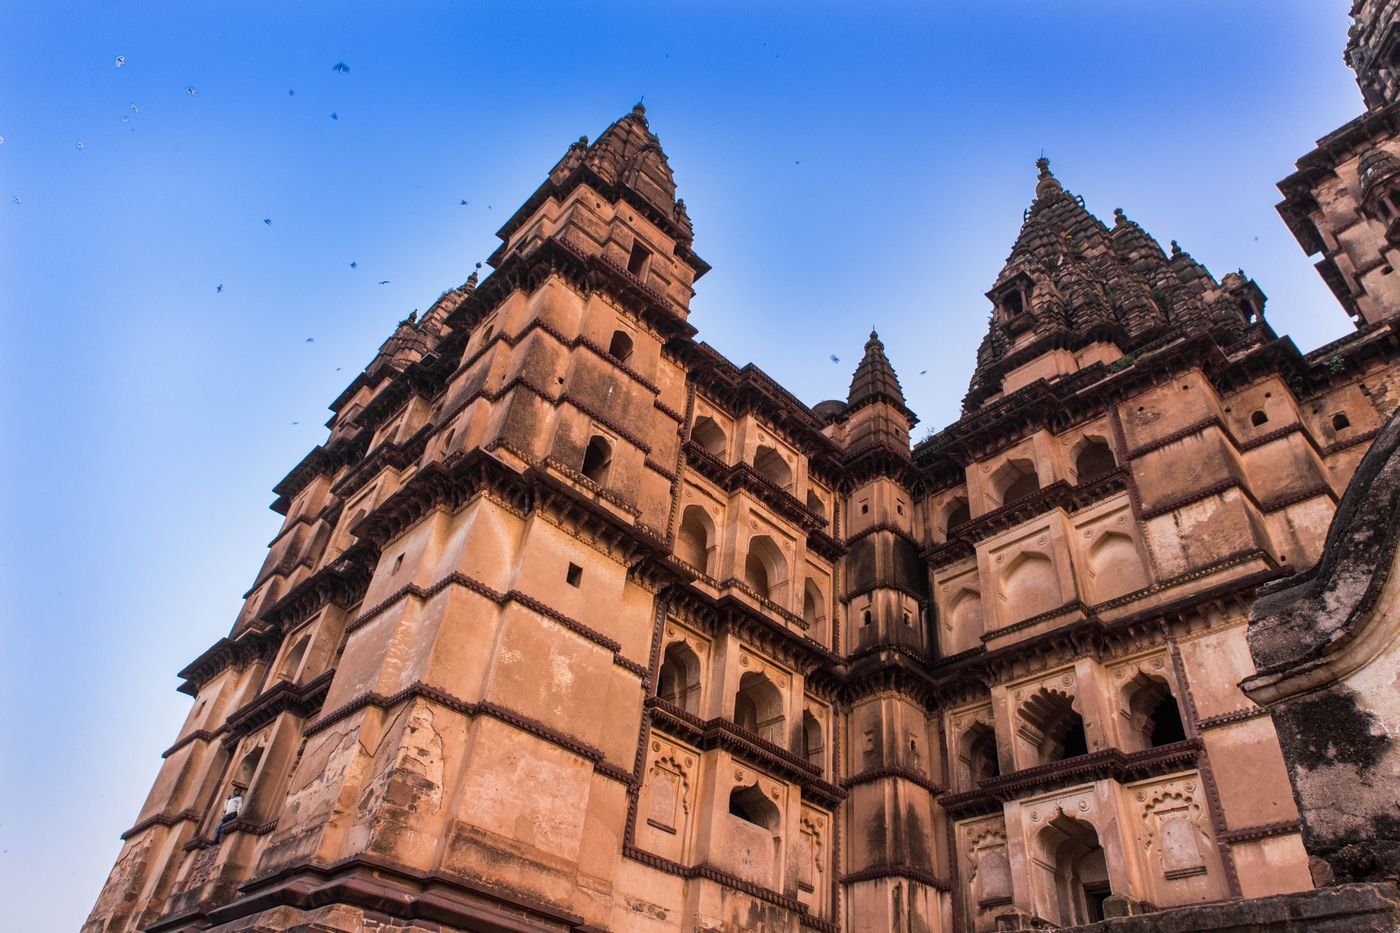 Raja Madhukar constructed the Chaturbhuj Temple between the years 1558 and 1573. It has one of the most magnificent ancient architectural designs. This temple is dedicated to Vishnu, Orchha 